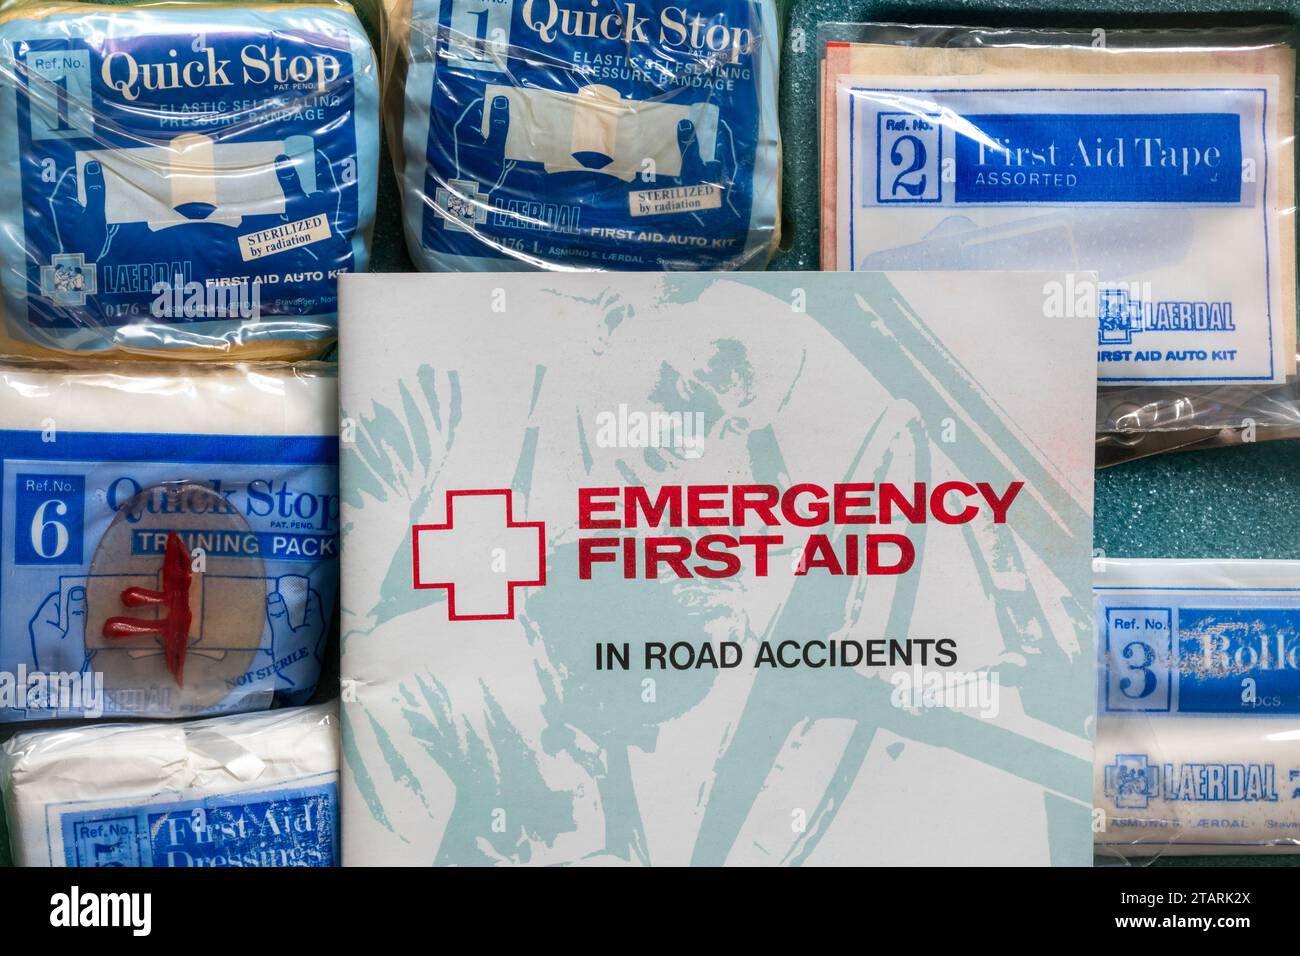 Emergency first aid kit for motorists, including instructions for road accidents and dressings Stock Photo